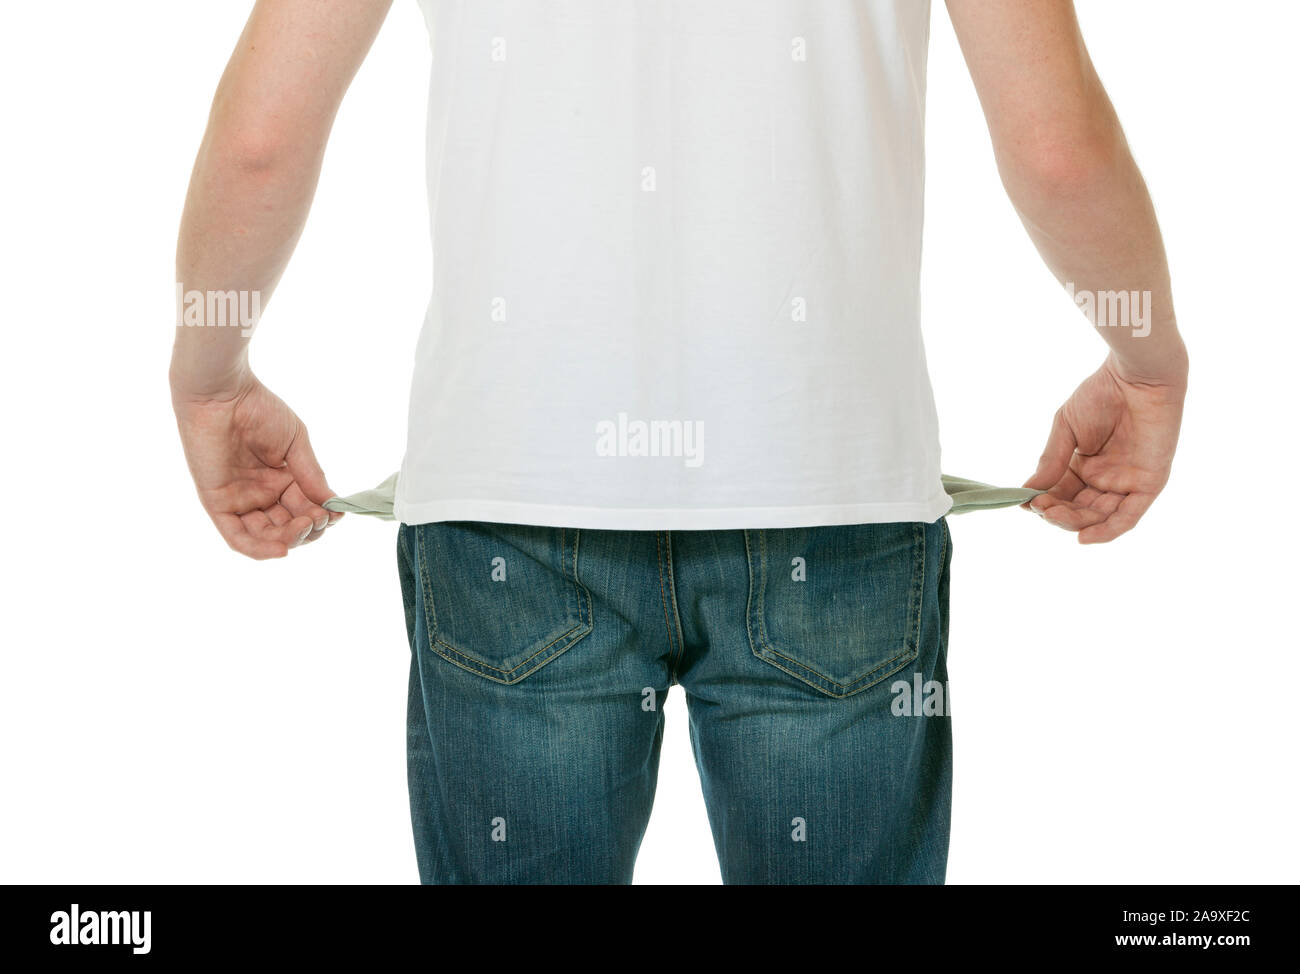 Male with pockets turned inside out on a white background Stock Photo